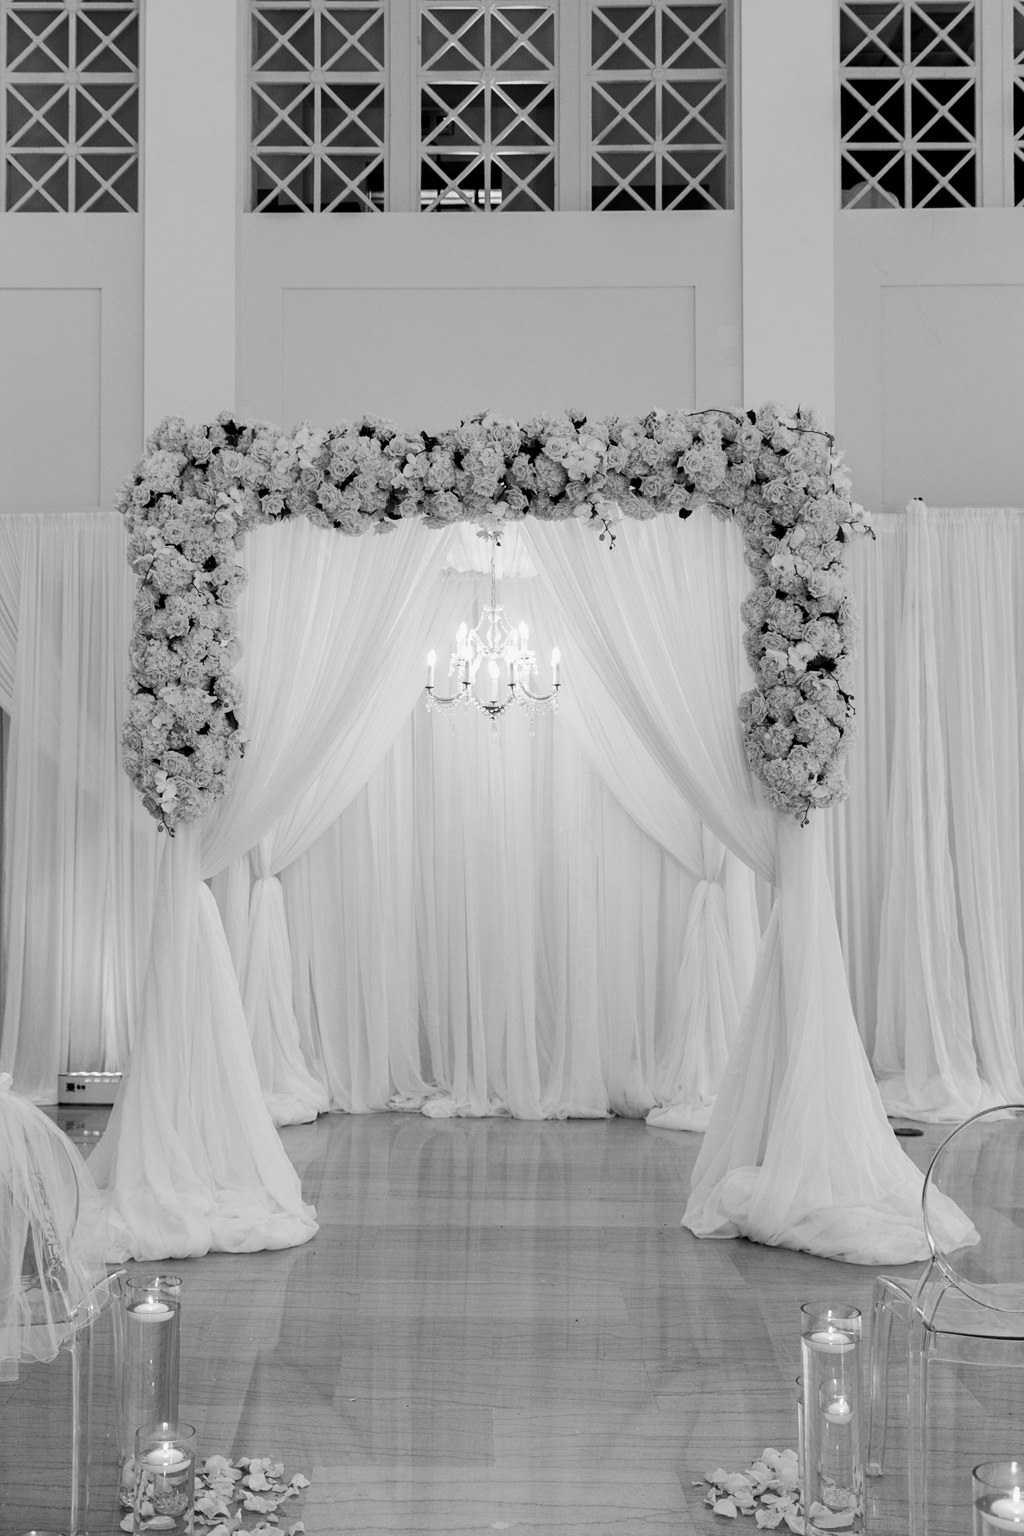 Modern Romantic Wedding Ceremony Decor, Draping with Floral Arrangements and Hanging Crystal Chandelier, Acrylic Ghost Chairs | Tampa Bay Wedding Venue The Vault | Wedding Florals and Rentals Gabro Event Services